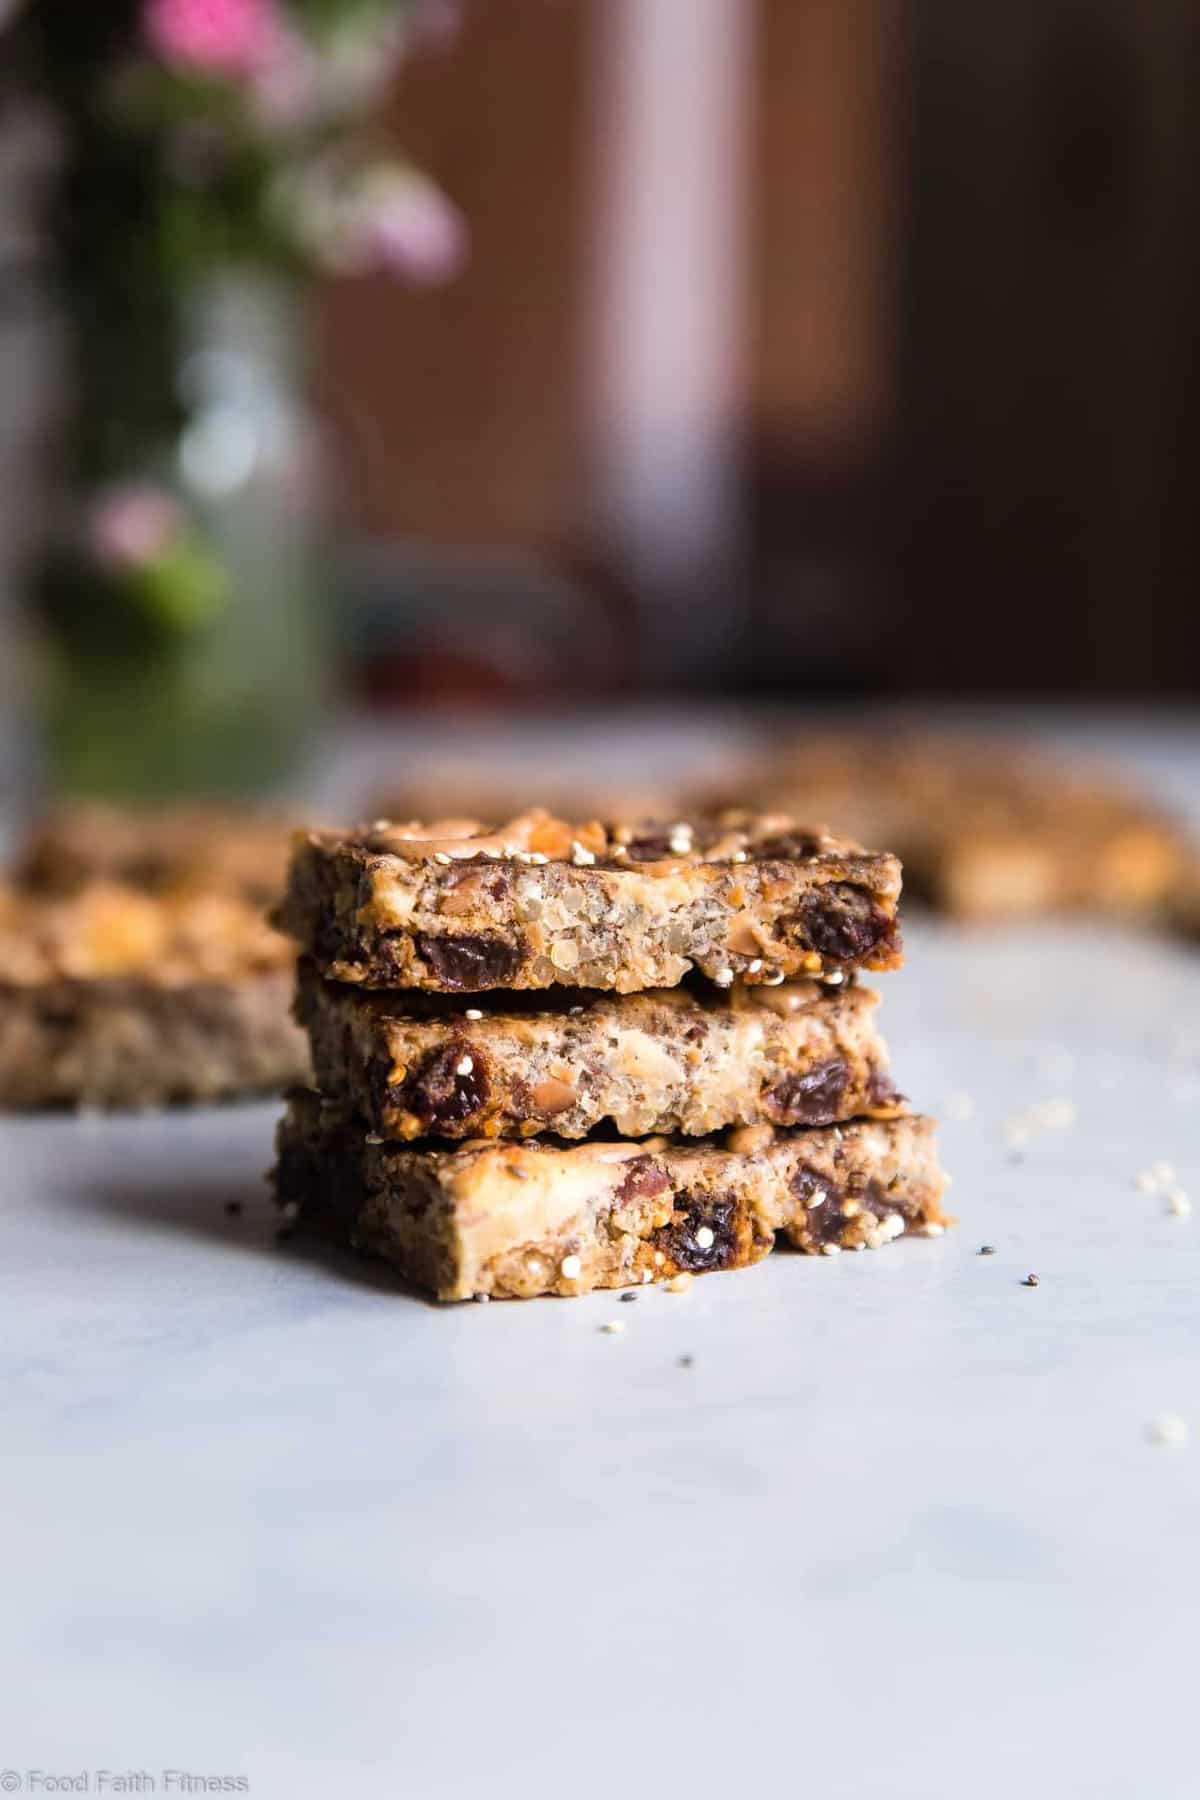 Healthy Quinoa Bars Recipe in the Slow Cooker - The slow cooker basically makes these easy quinoa breakfast bars for you! Gluten and dairy free and loaded with fiber to keep you full! Great for snacks too! | #Foodfaithfitness |